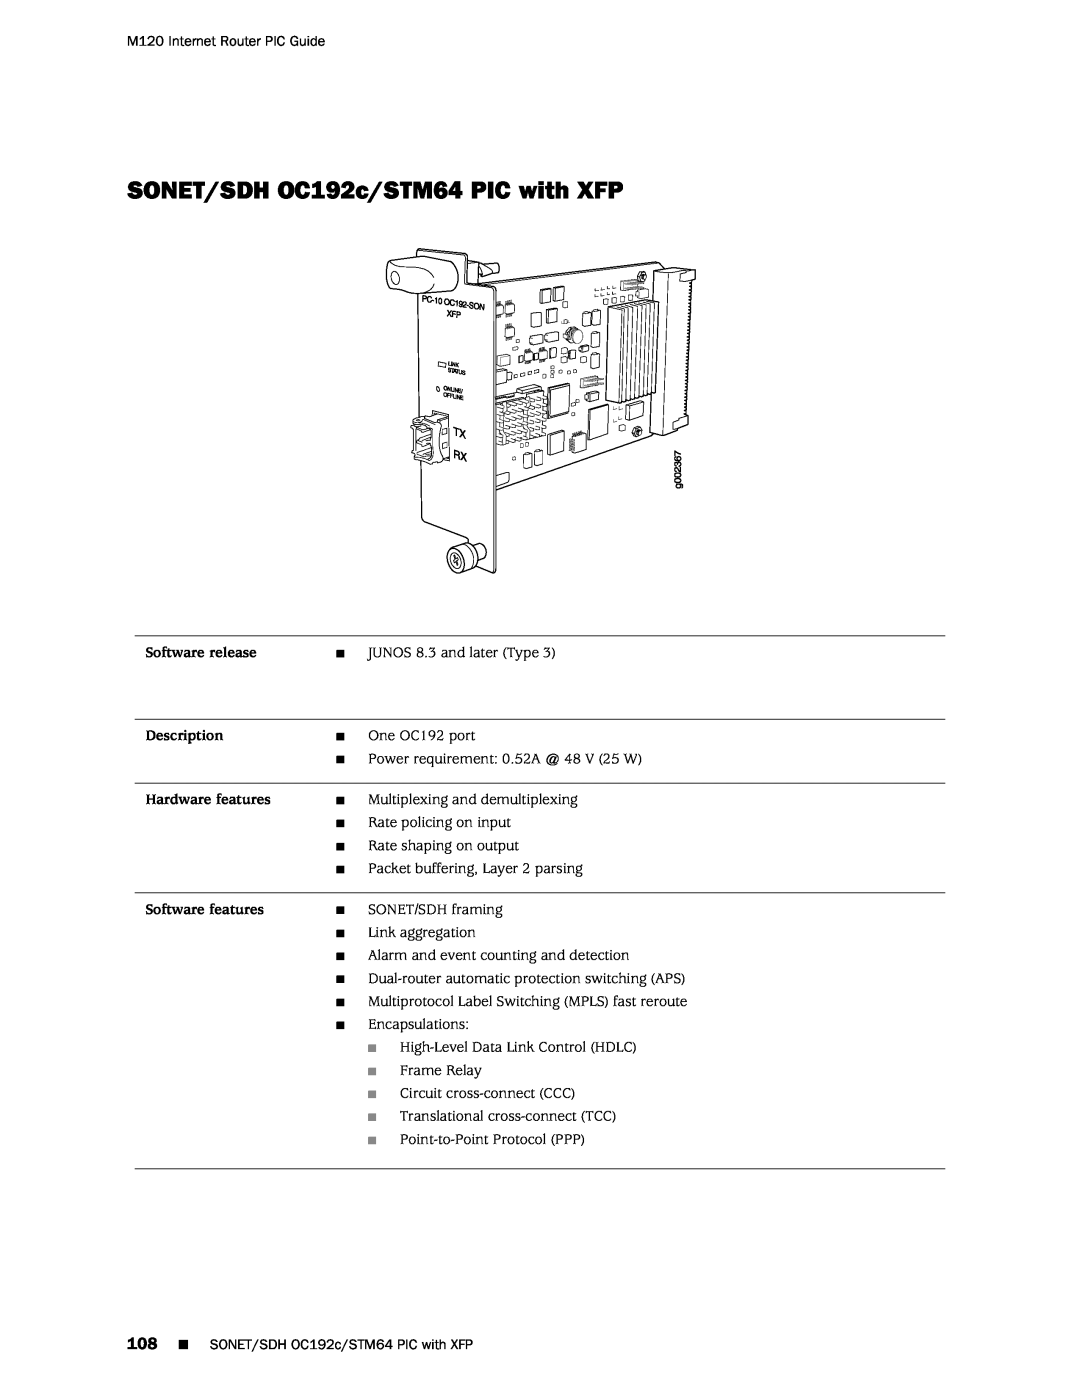 Juniper Networks M120 manual SONET/SDH OC192c/STM64 PIC with XFP, Software release, Description, Hardware features 